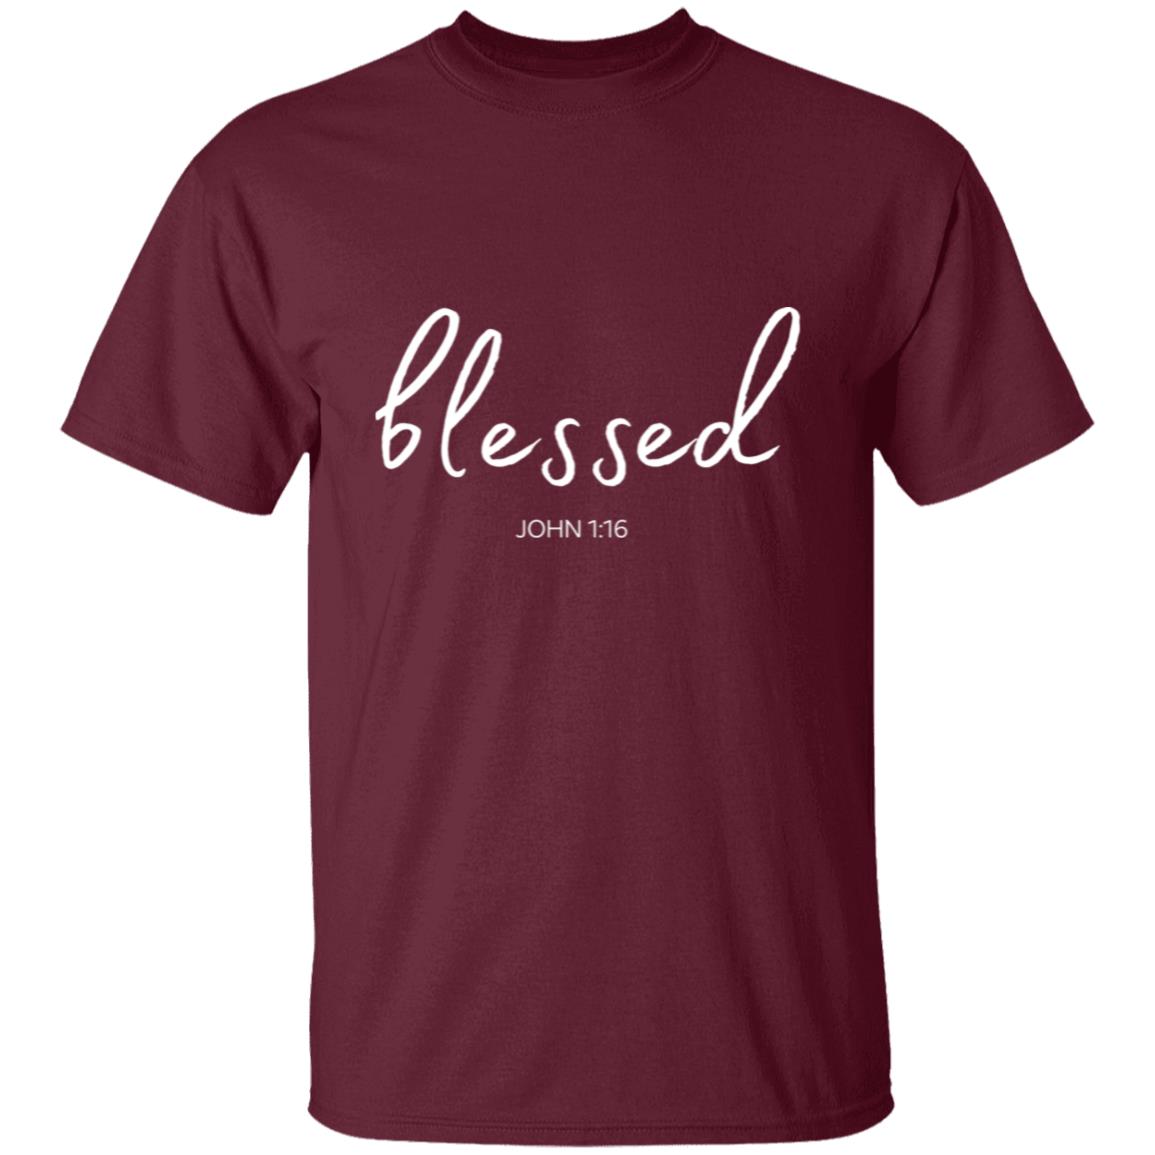 Get trendy with Blessed (John 1:16) T-Shirt:  Words of Faith Series (White Text) - T-Shirts available at Good Gift Company. Grab yours for $21.95 today!